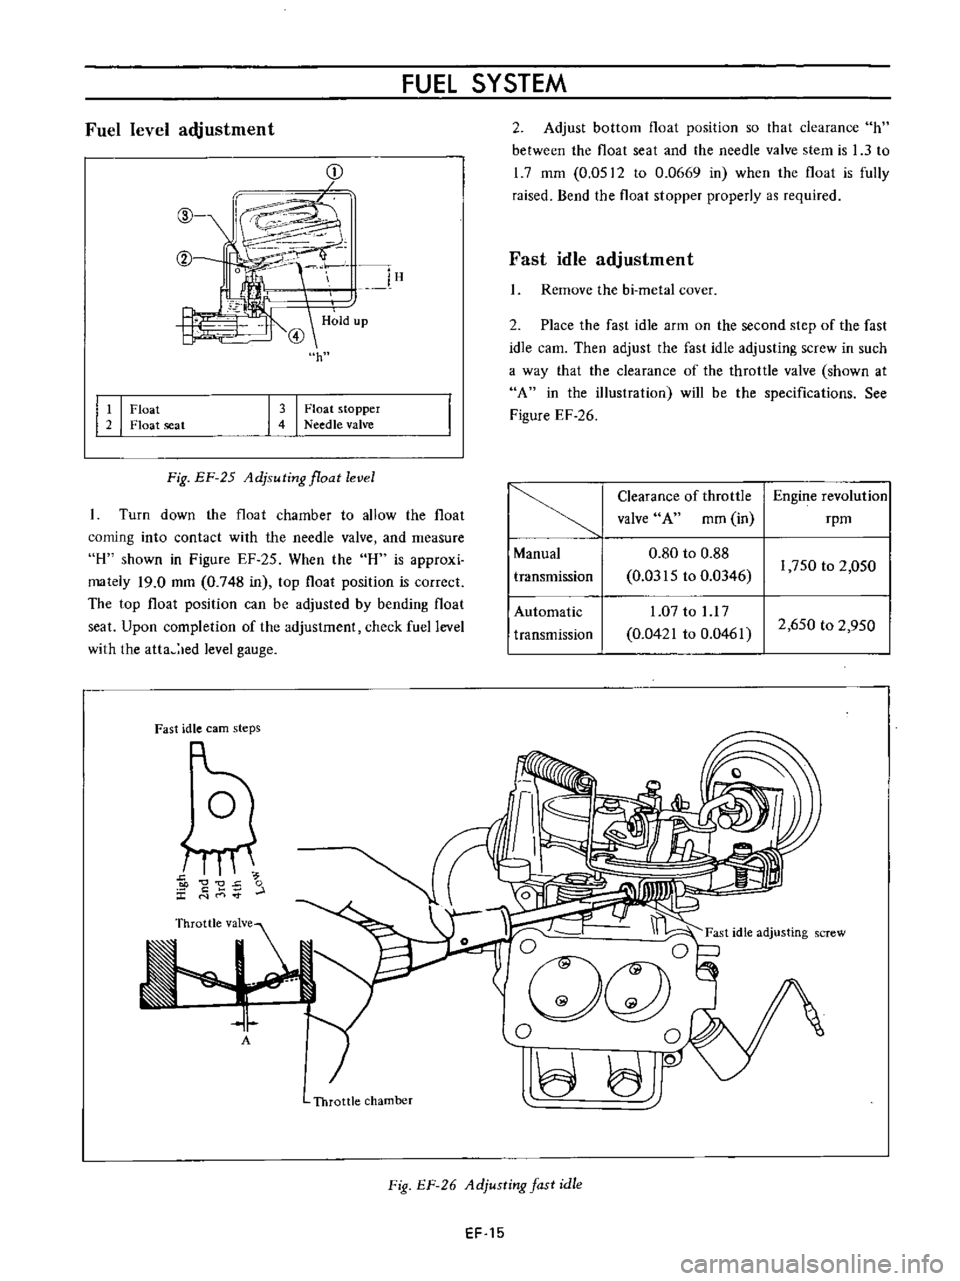 DATSUN B110 1973  Service Repair Manual 
CD

r
Fuel 
level

adjustment

@

@

It 
I 
Float

2

Float 
seat 
FUEL 
SYSTEM

2

Adjust 
bottom 
float

position 
so 
that

clearance 
h

between

the 
float 
seat 
and 
the 
needle 
valve

stem 
